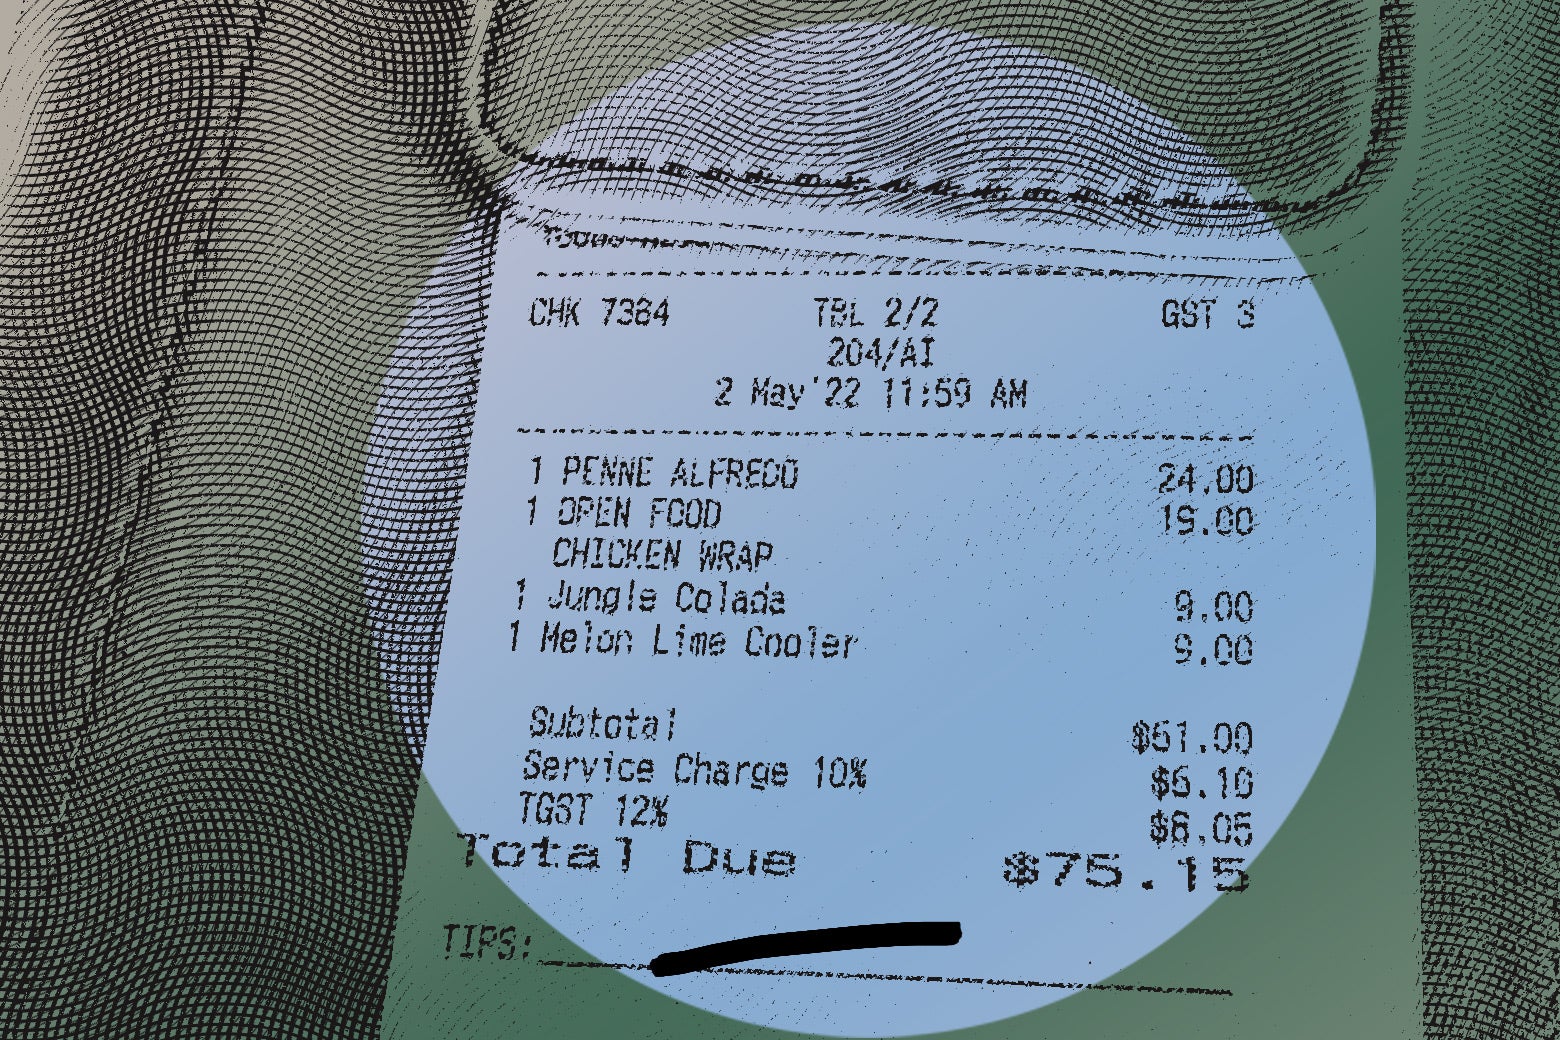 A receipt with no tip.